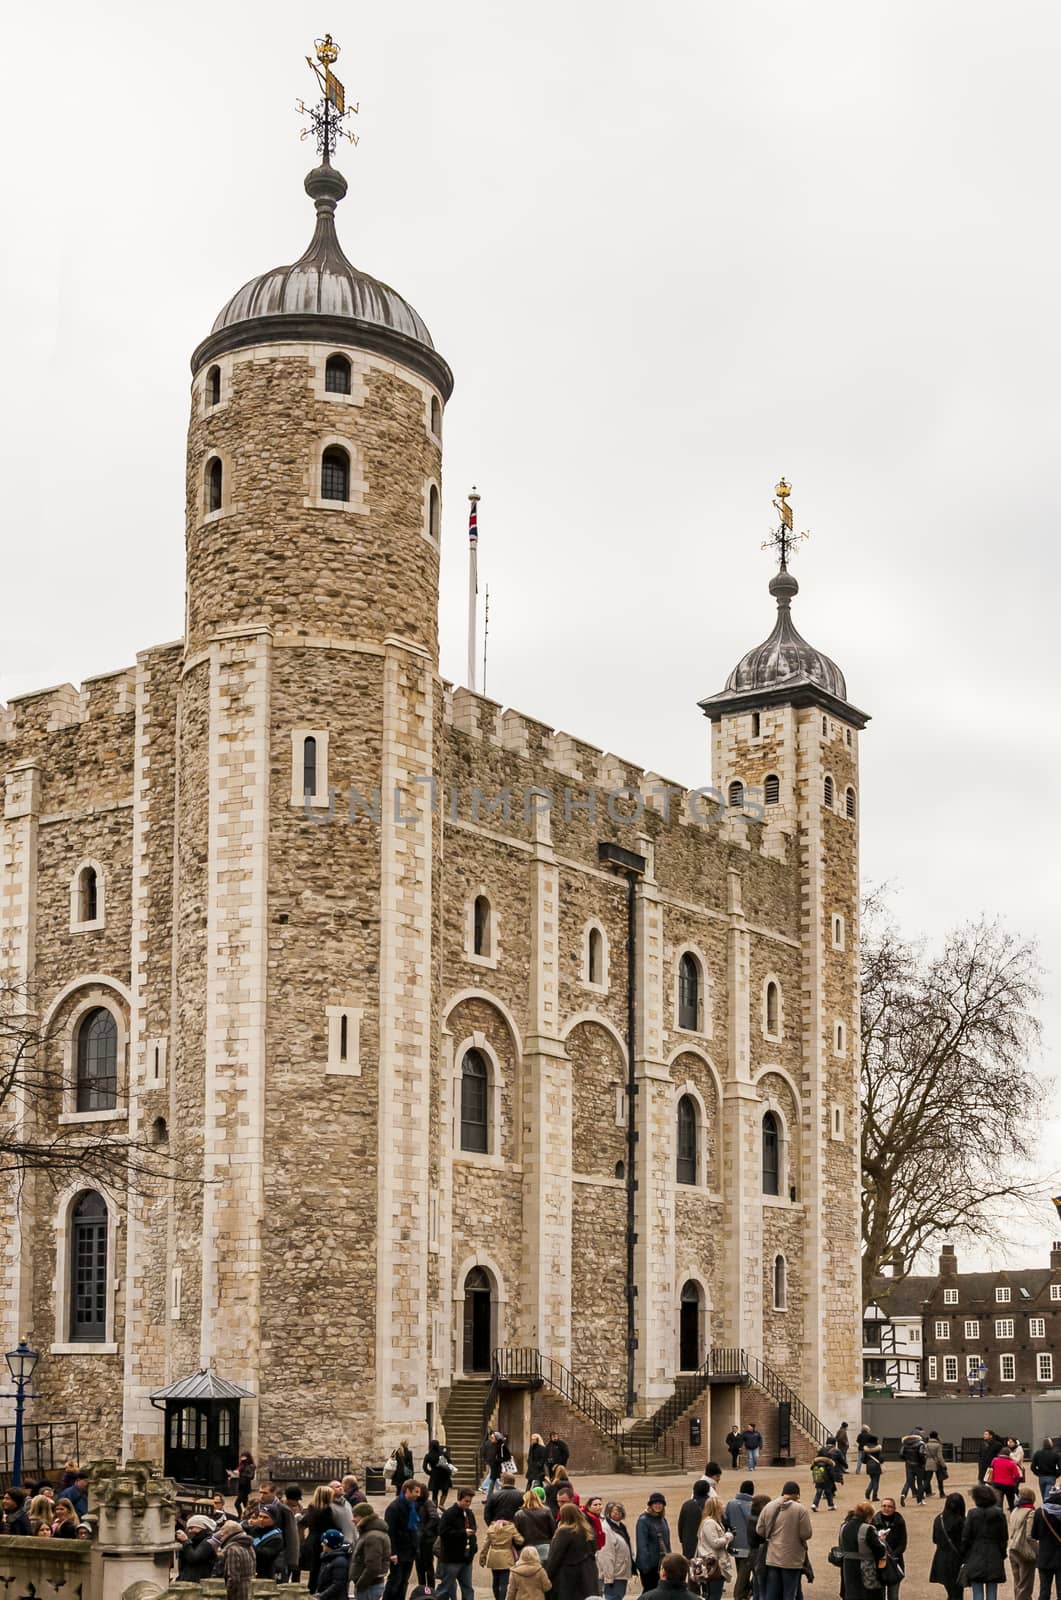 The White Tower of London by edella